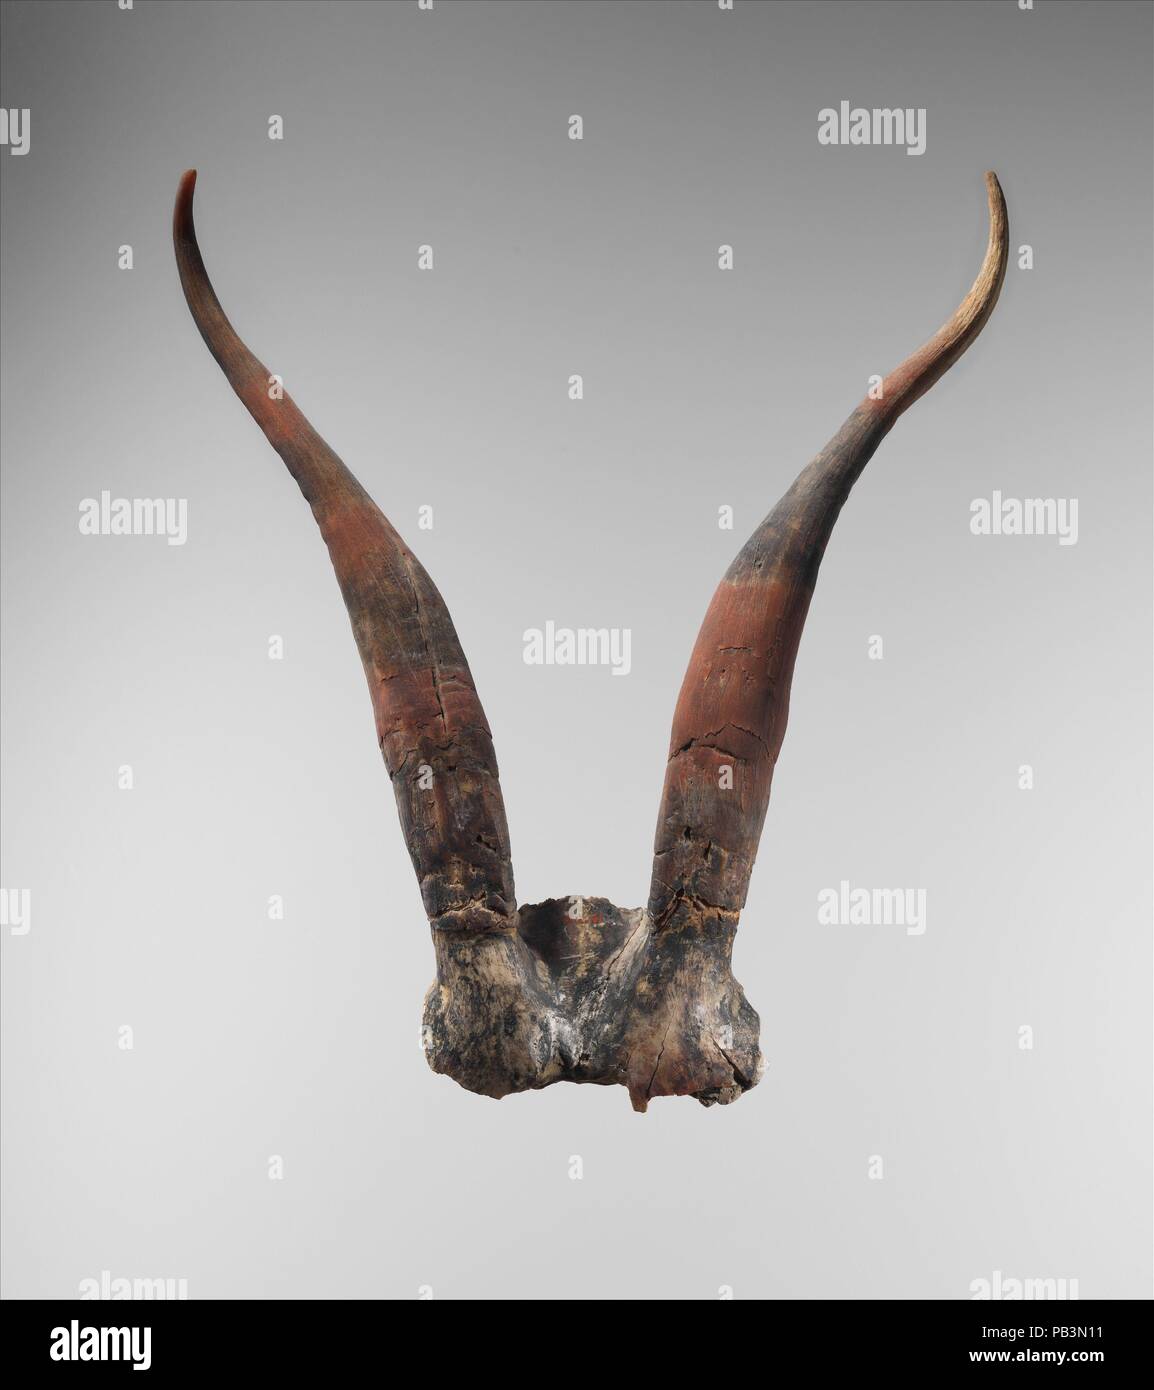 Bucrania skulls with antlers. Dimensions: w. of antlers 21.4 cm. (8 7/8 in). Dynasty: Dynasty 14-17. Date: ca. 1640-1550 B.C.. Museum: Metropolitan Museum of Art, New York, USA. Stock Photo